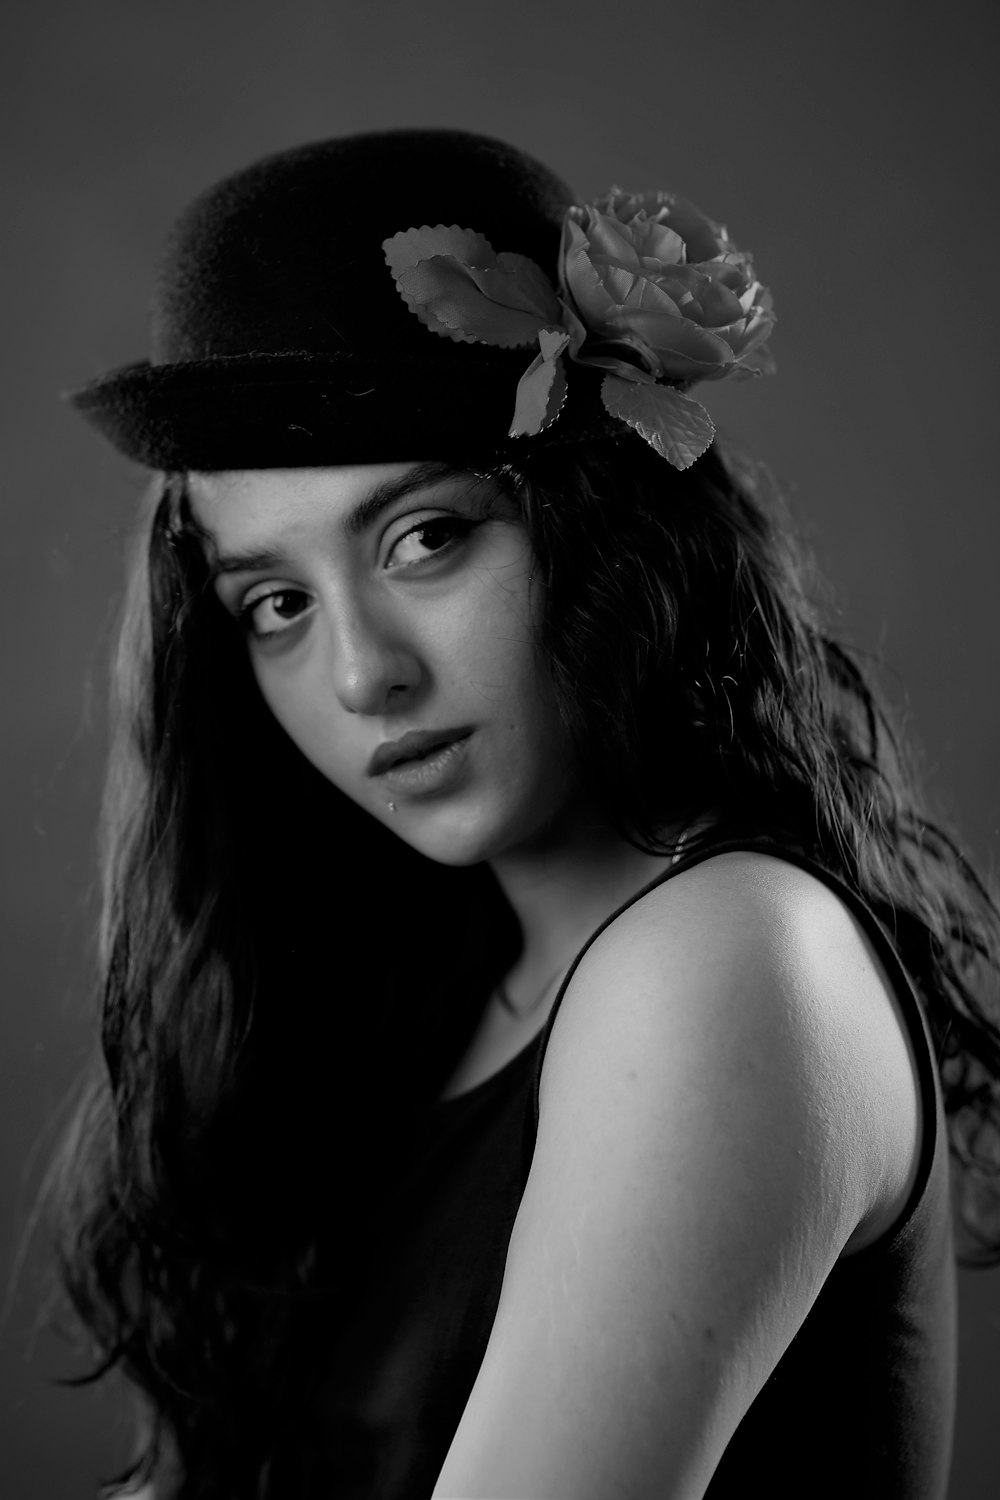 a woman wearing a hat with a rose on it